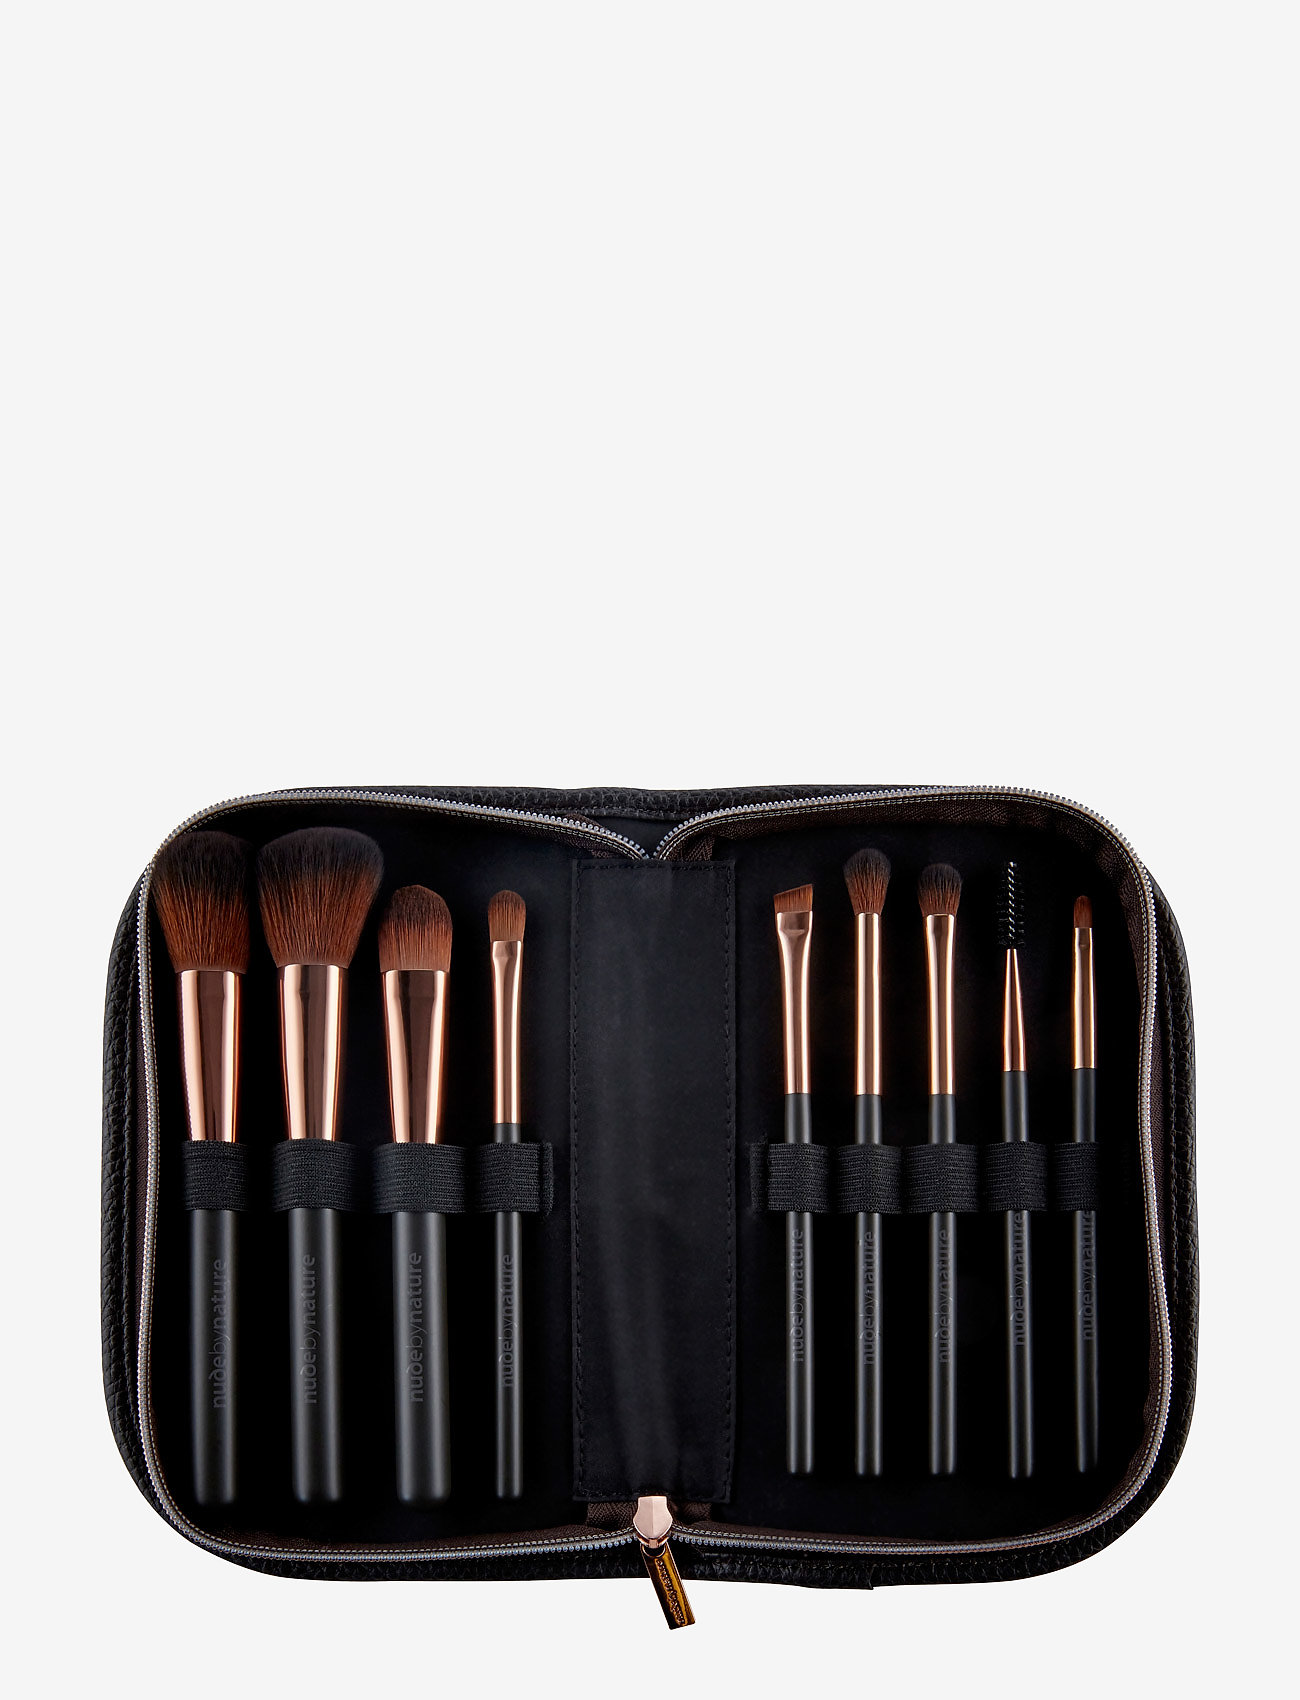 Nude by Nature - BRUSHES ULTIMATE COLL PROF BRUSH SET - clear - 0